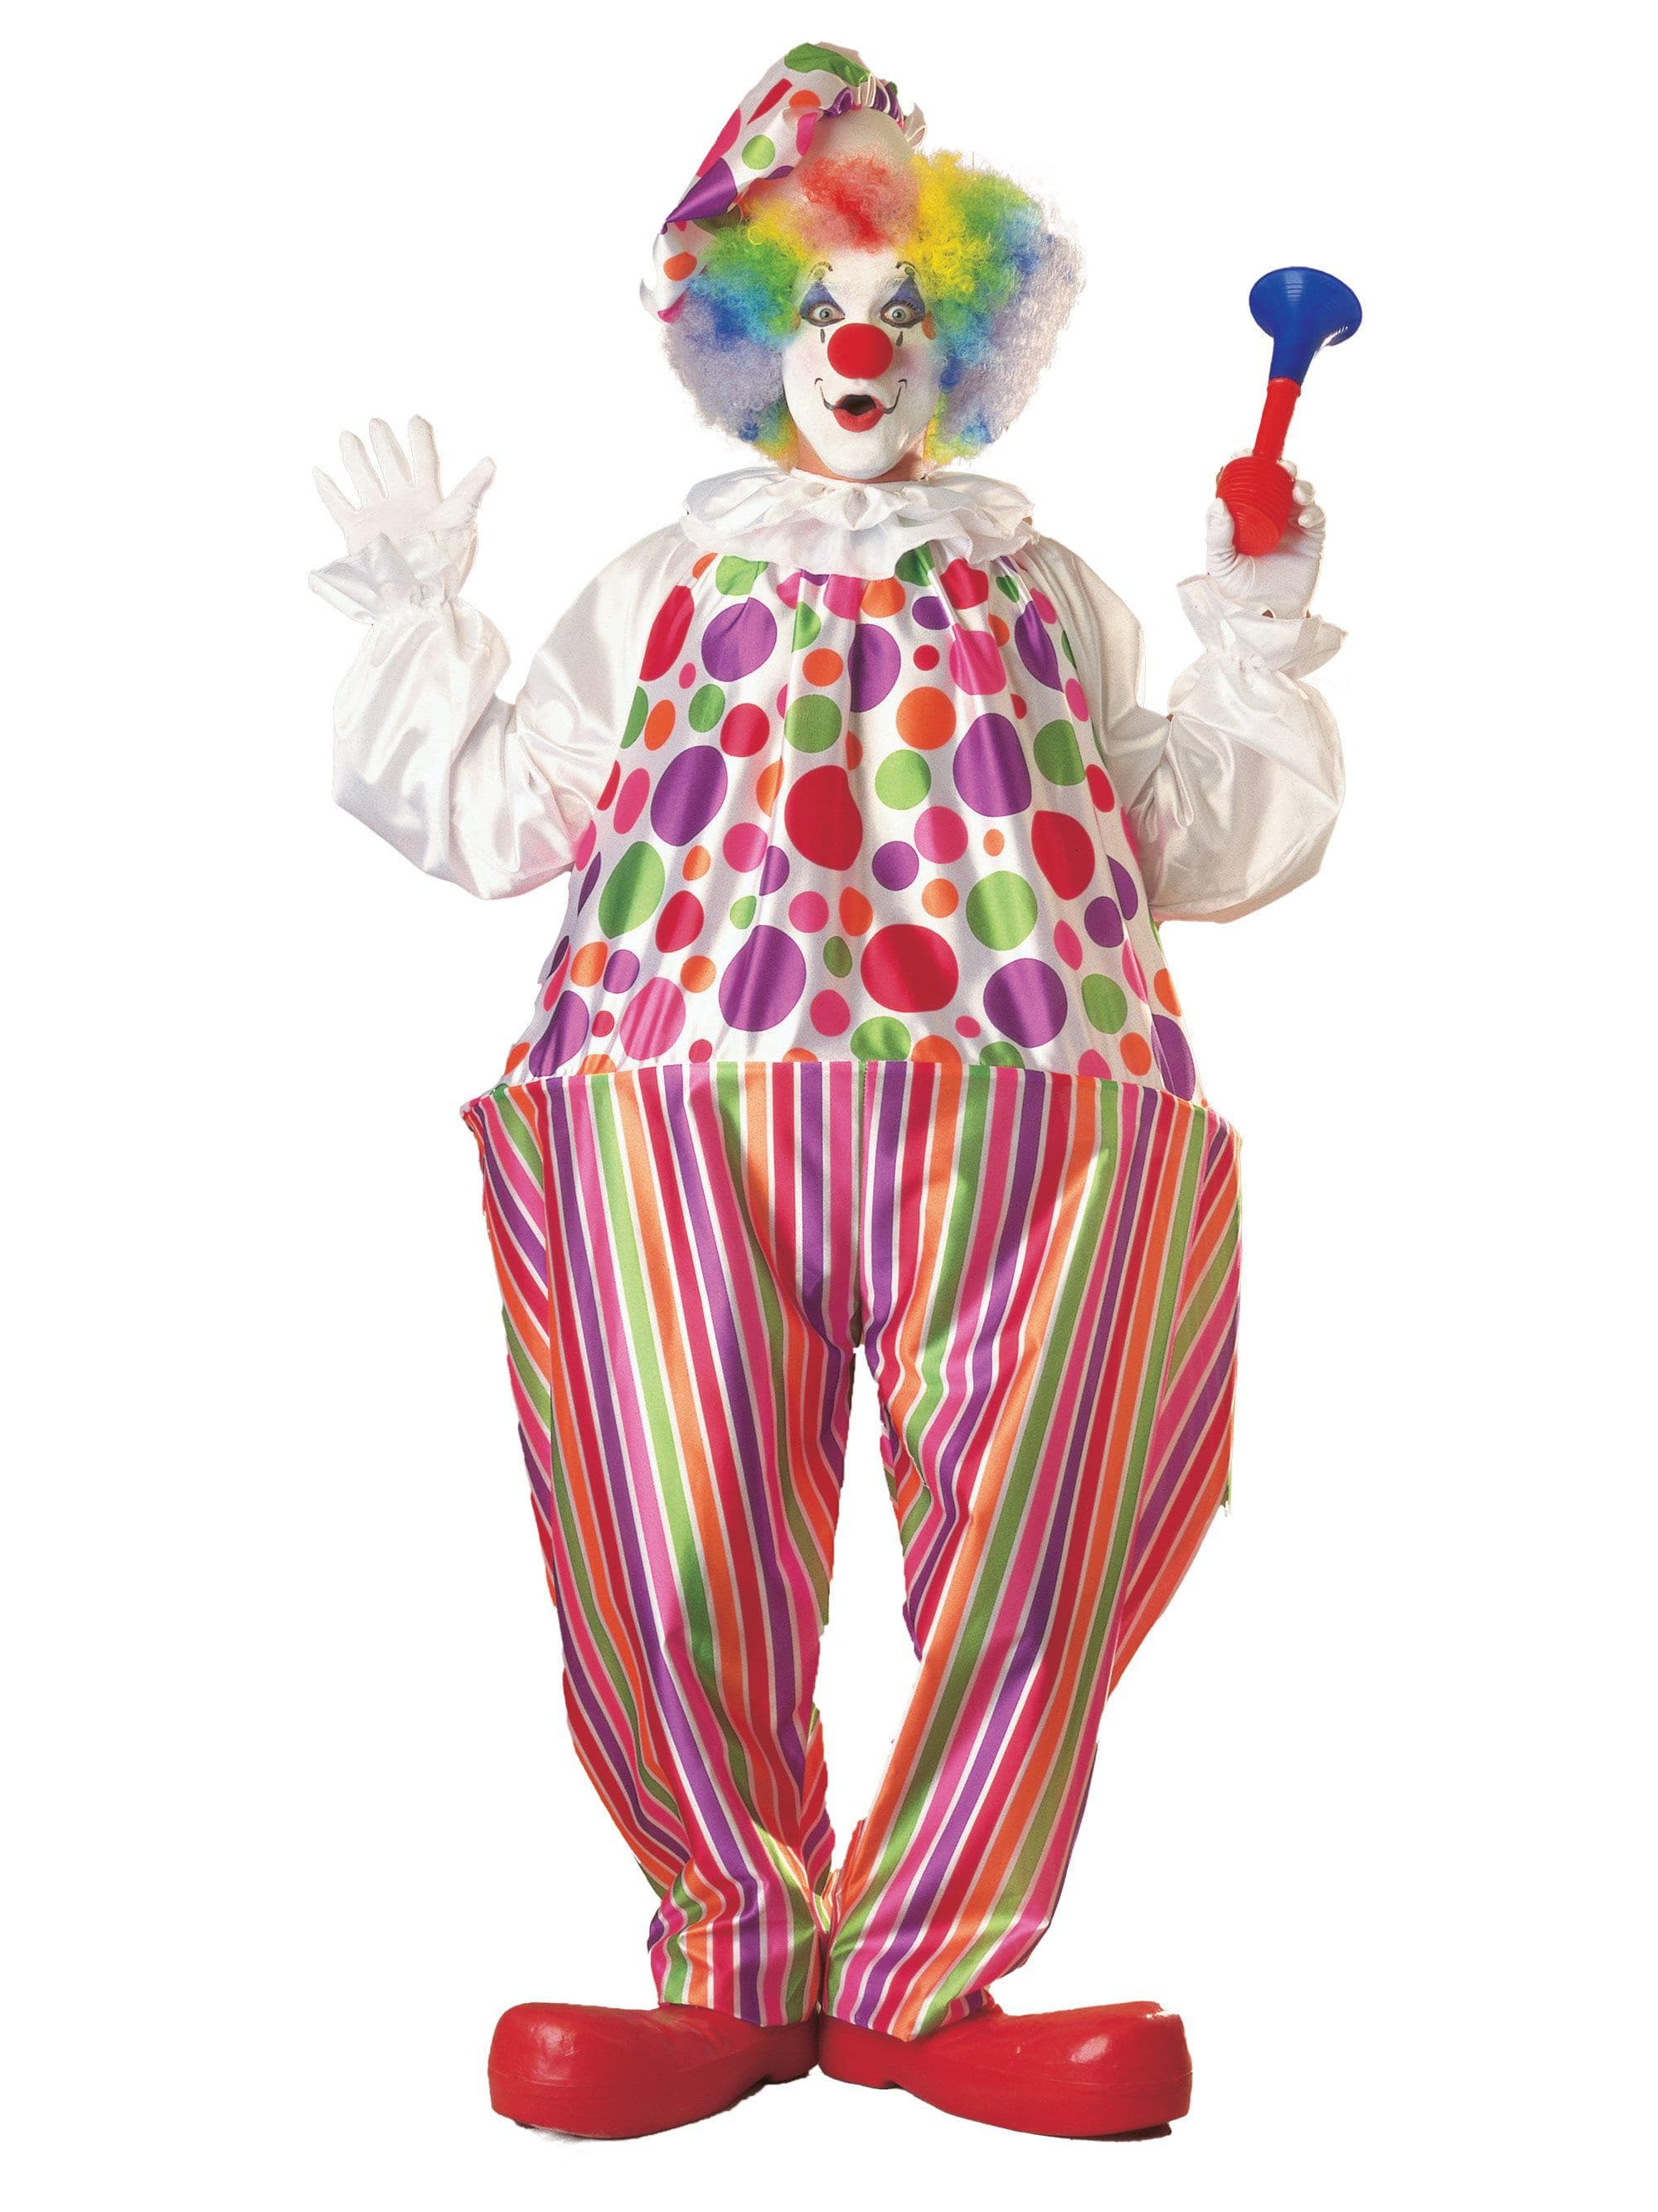 Adult Snazzy Clown Costume - costumes.com